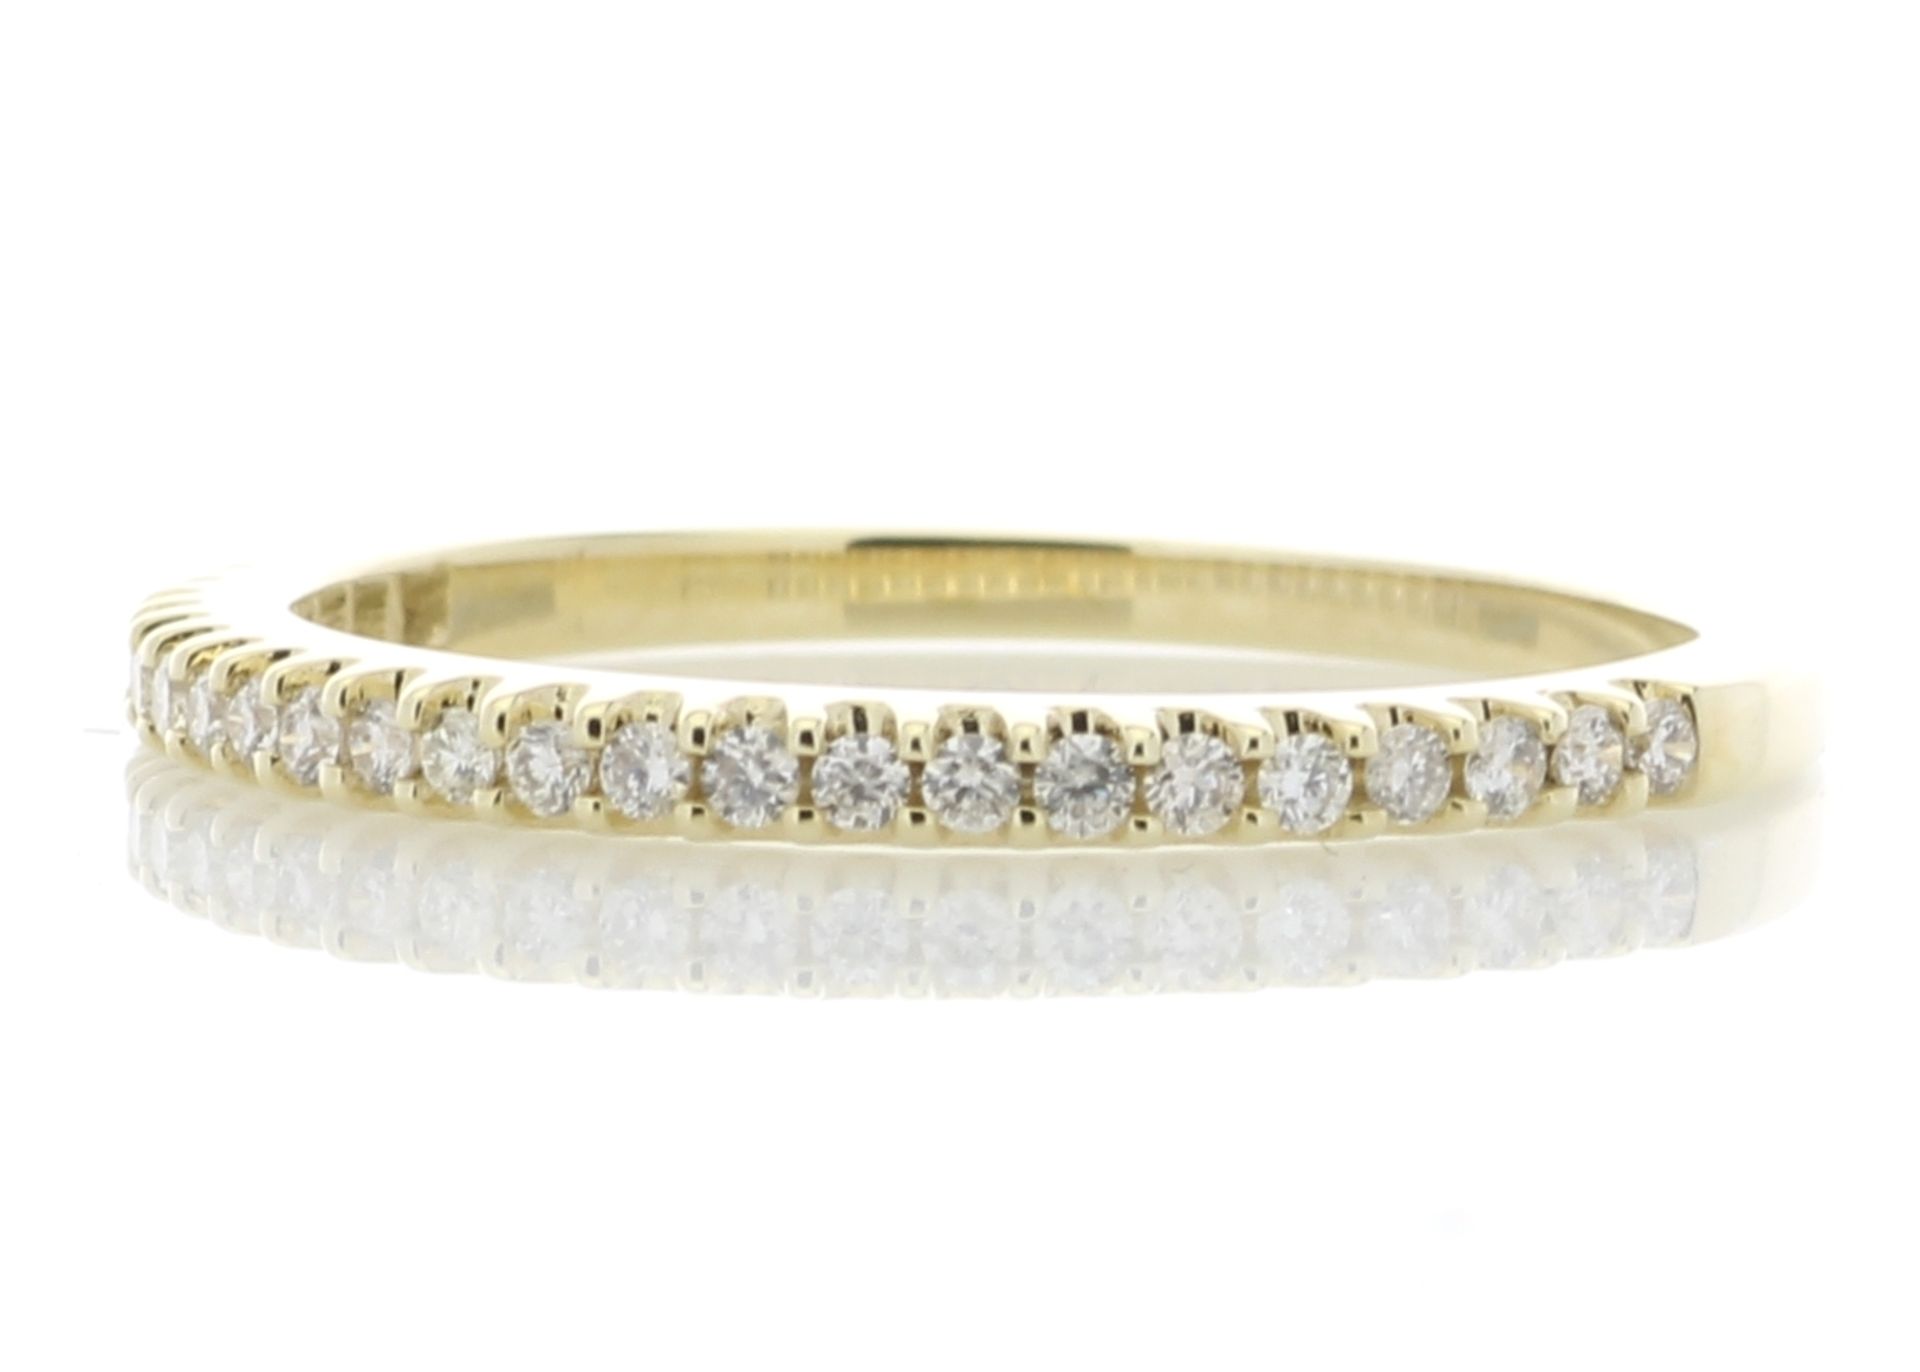 9ct Yellow Gold Diamond Half Eternity Ring 0.25 Carats - Valued by GIE £2,645.00 - 9ct Yellow Gold - Image 2 of 5